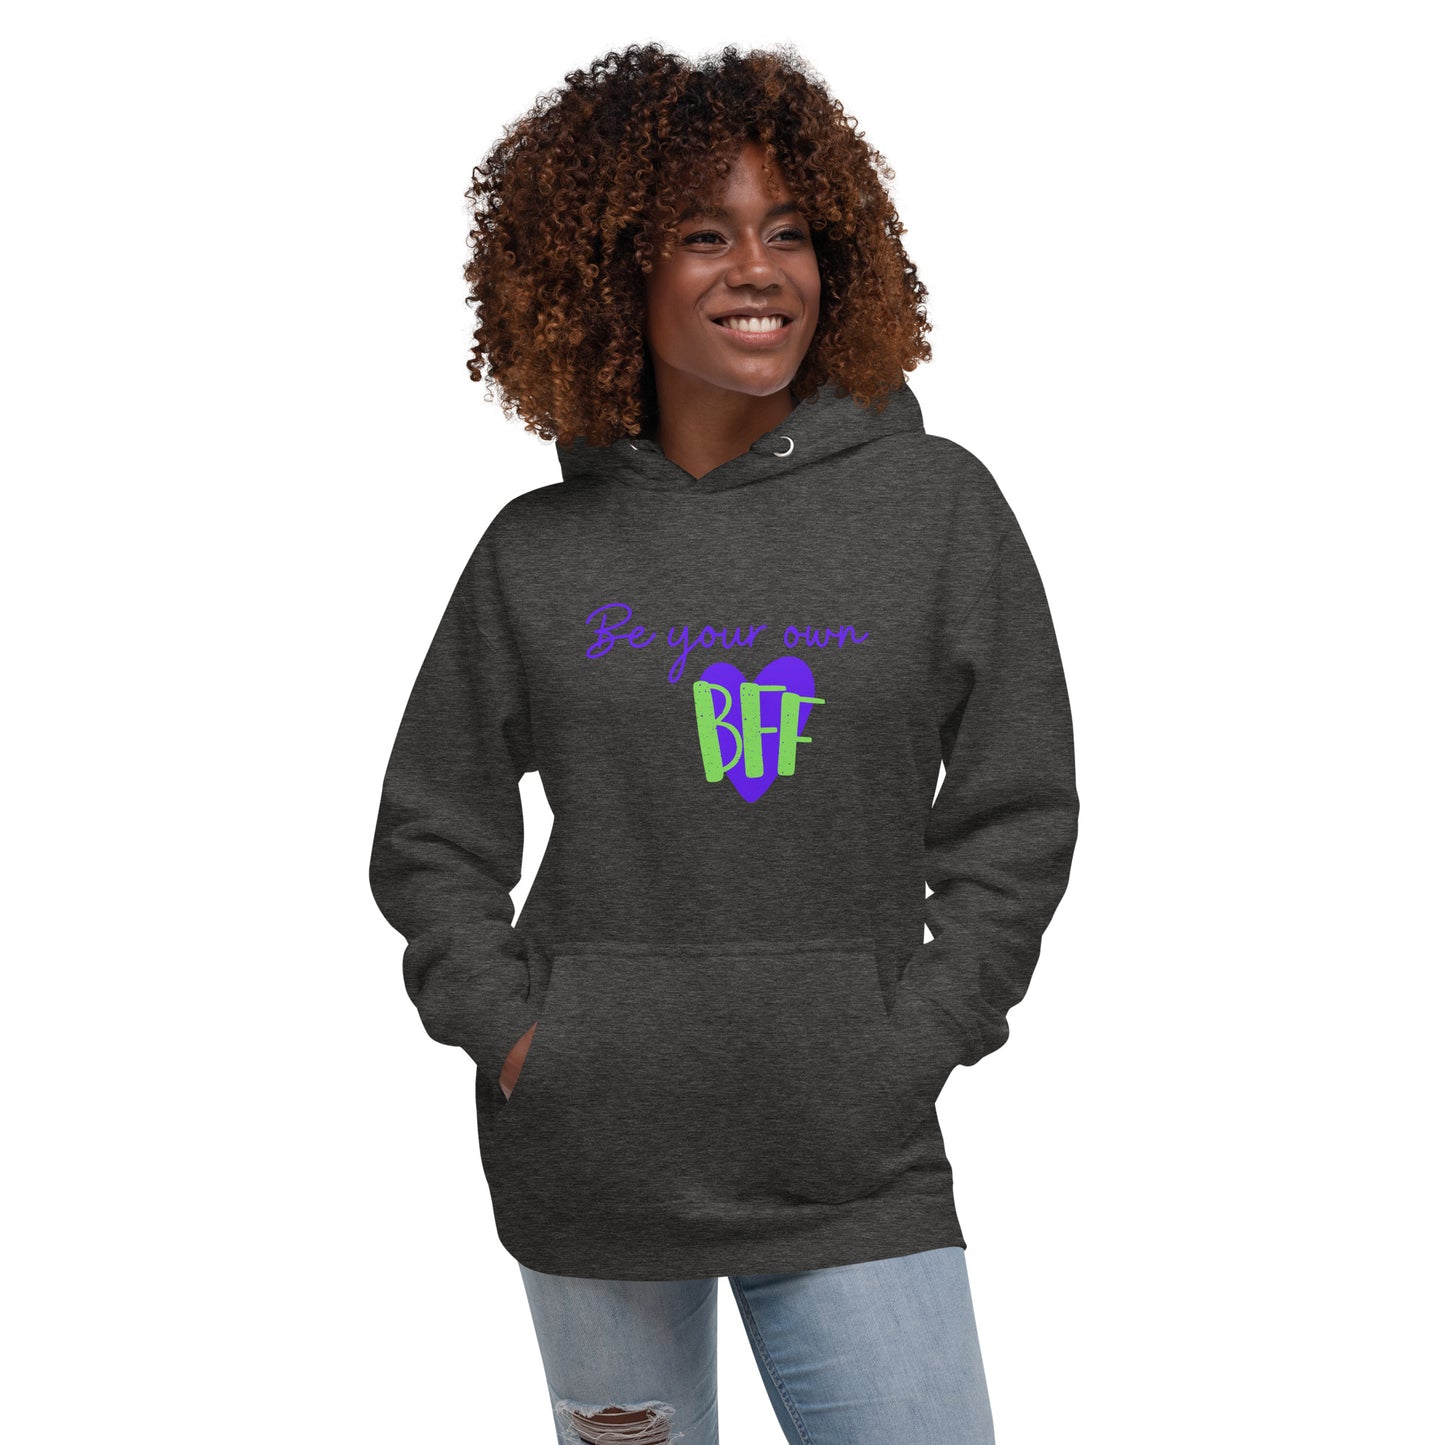 Unisex Hoodie - Be your own BFF